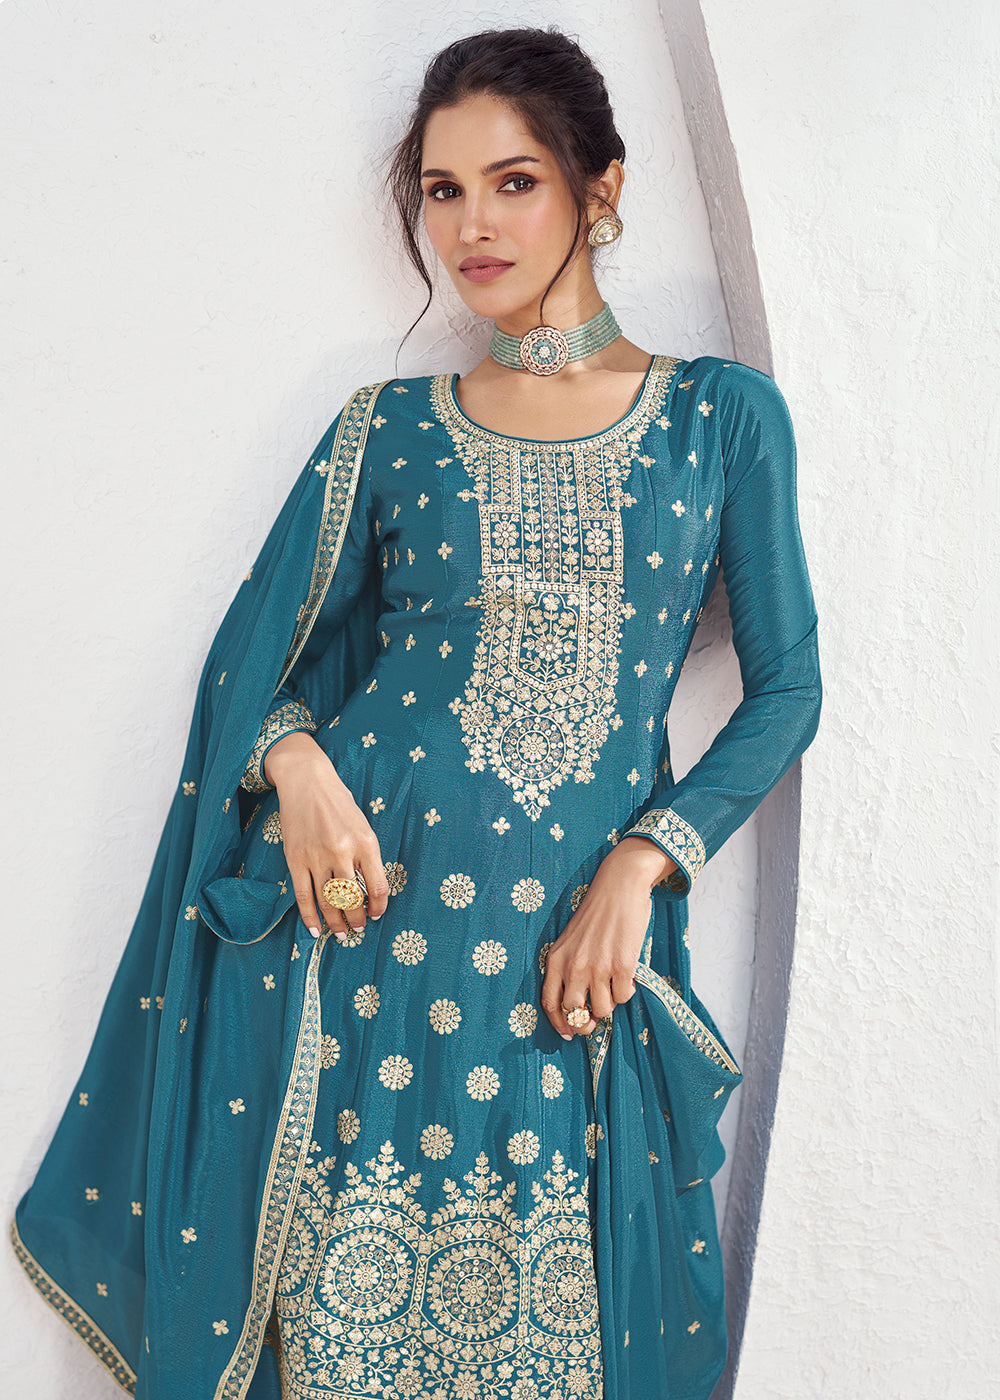 Buy Now Incredible Teal Blue Embroidered Chinnon Festive Palazzo Suit Online in USA, UK, Canada, Germany, Australia & Worldwide at Empress Clothing.